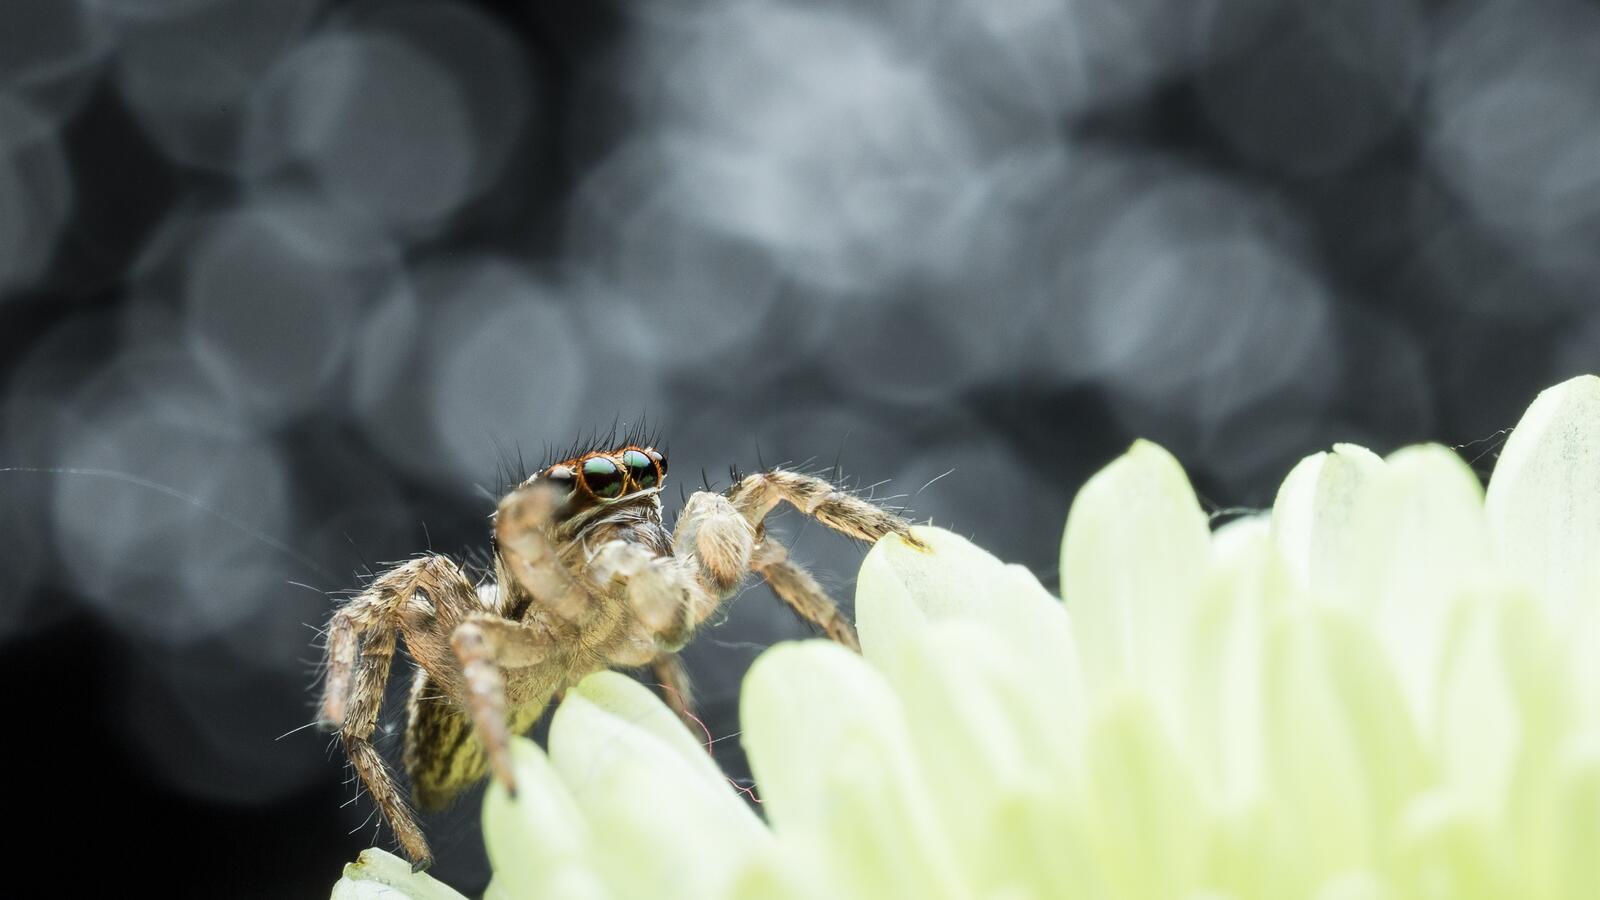 Free photo An eye-eyed, surprised spider crawls on a flower